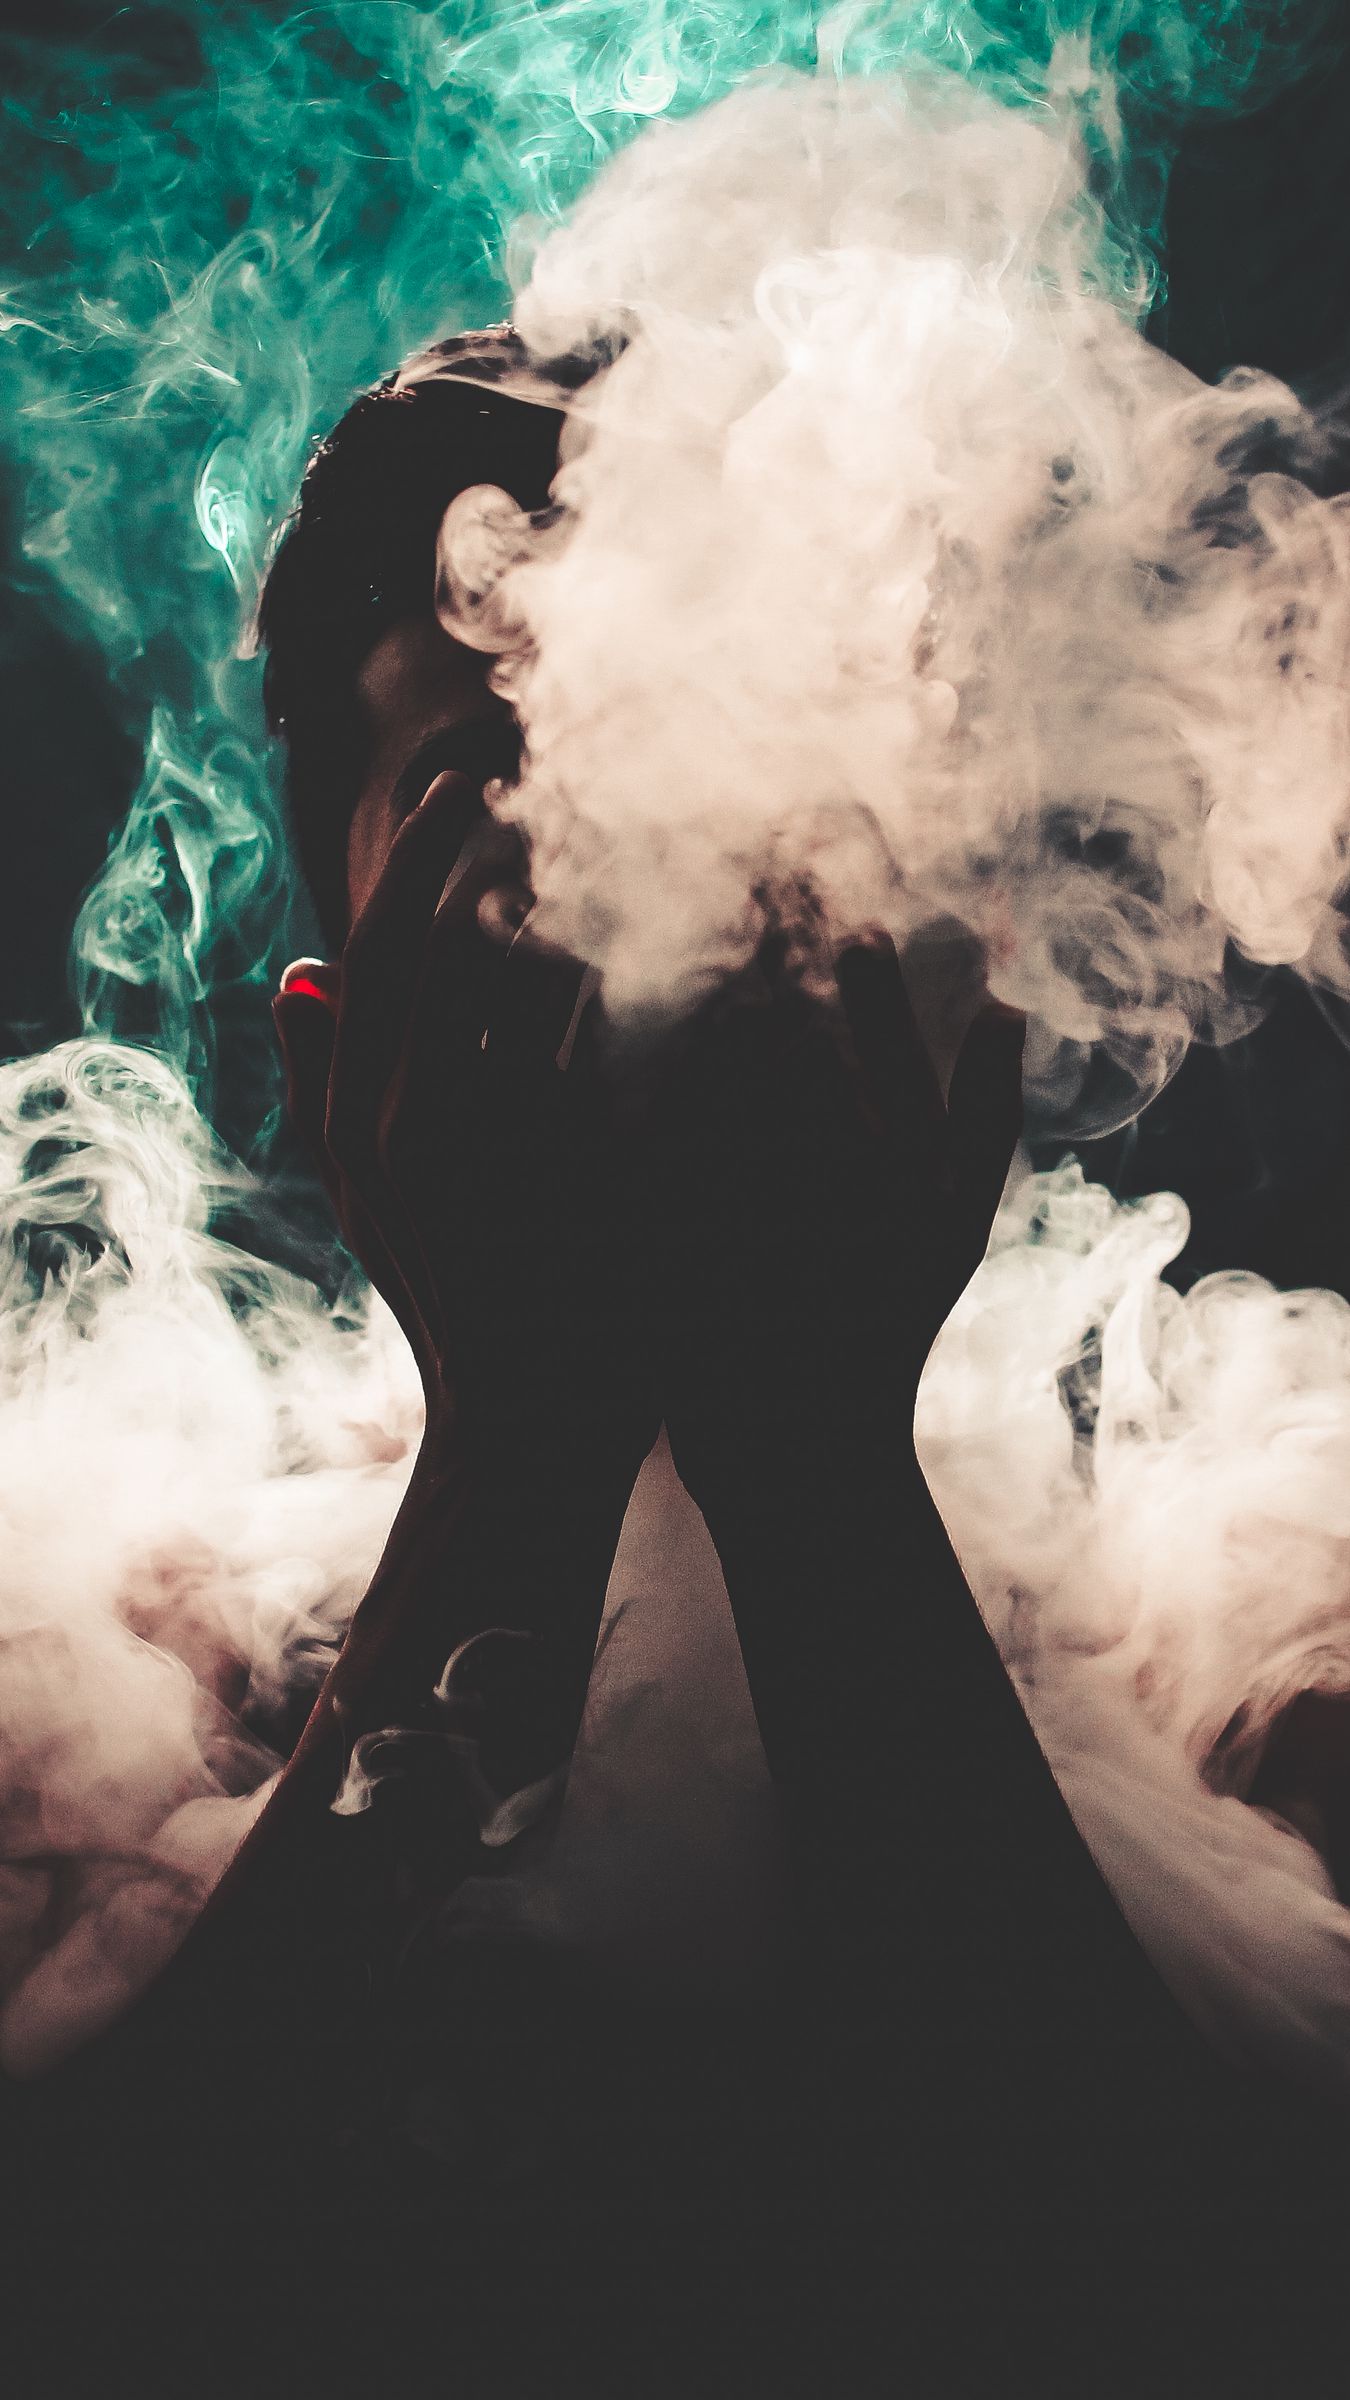 Download wallpaper 1350x2400 man, smoke, hands, colorful smoke iphone  8+/7+/6s+/6+ for parallax hd background